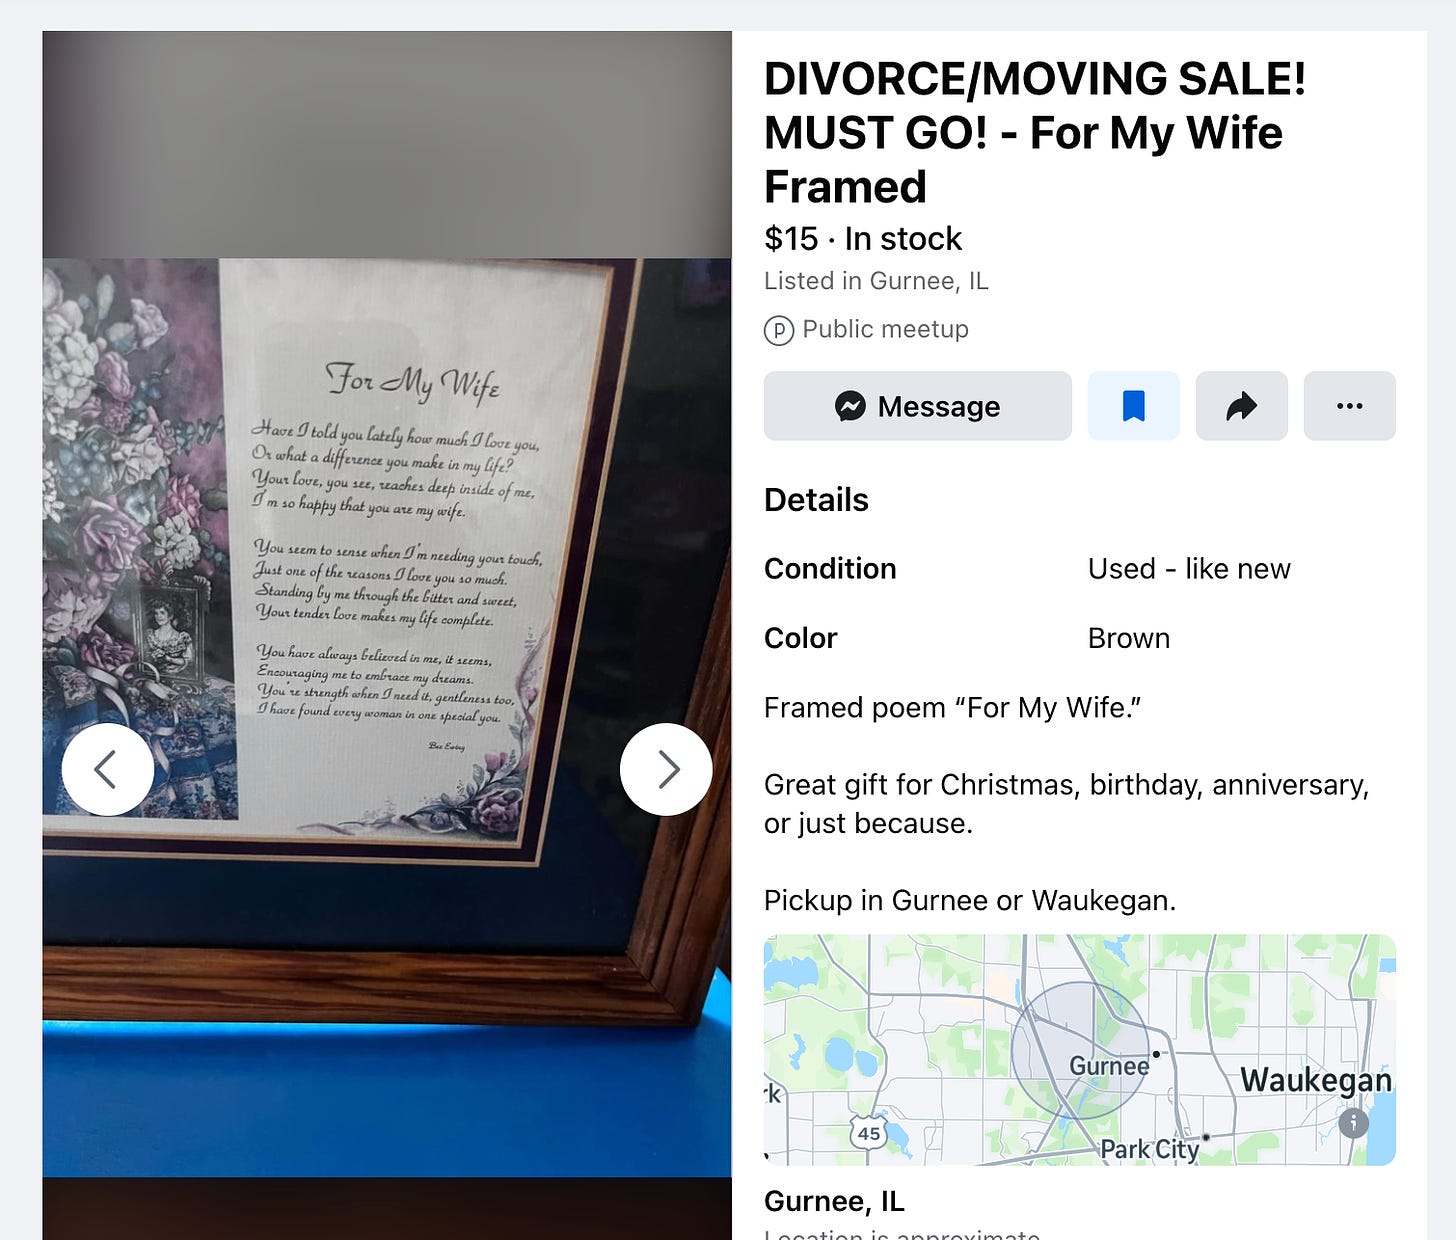 facebook marketplace listing for DIVORCE / MOVING SALE, framed poem "For My Wife. Great gift for Christmas, birthday, anniversary, or just because"